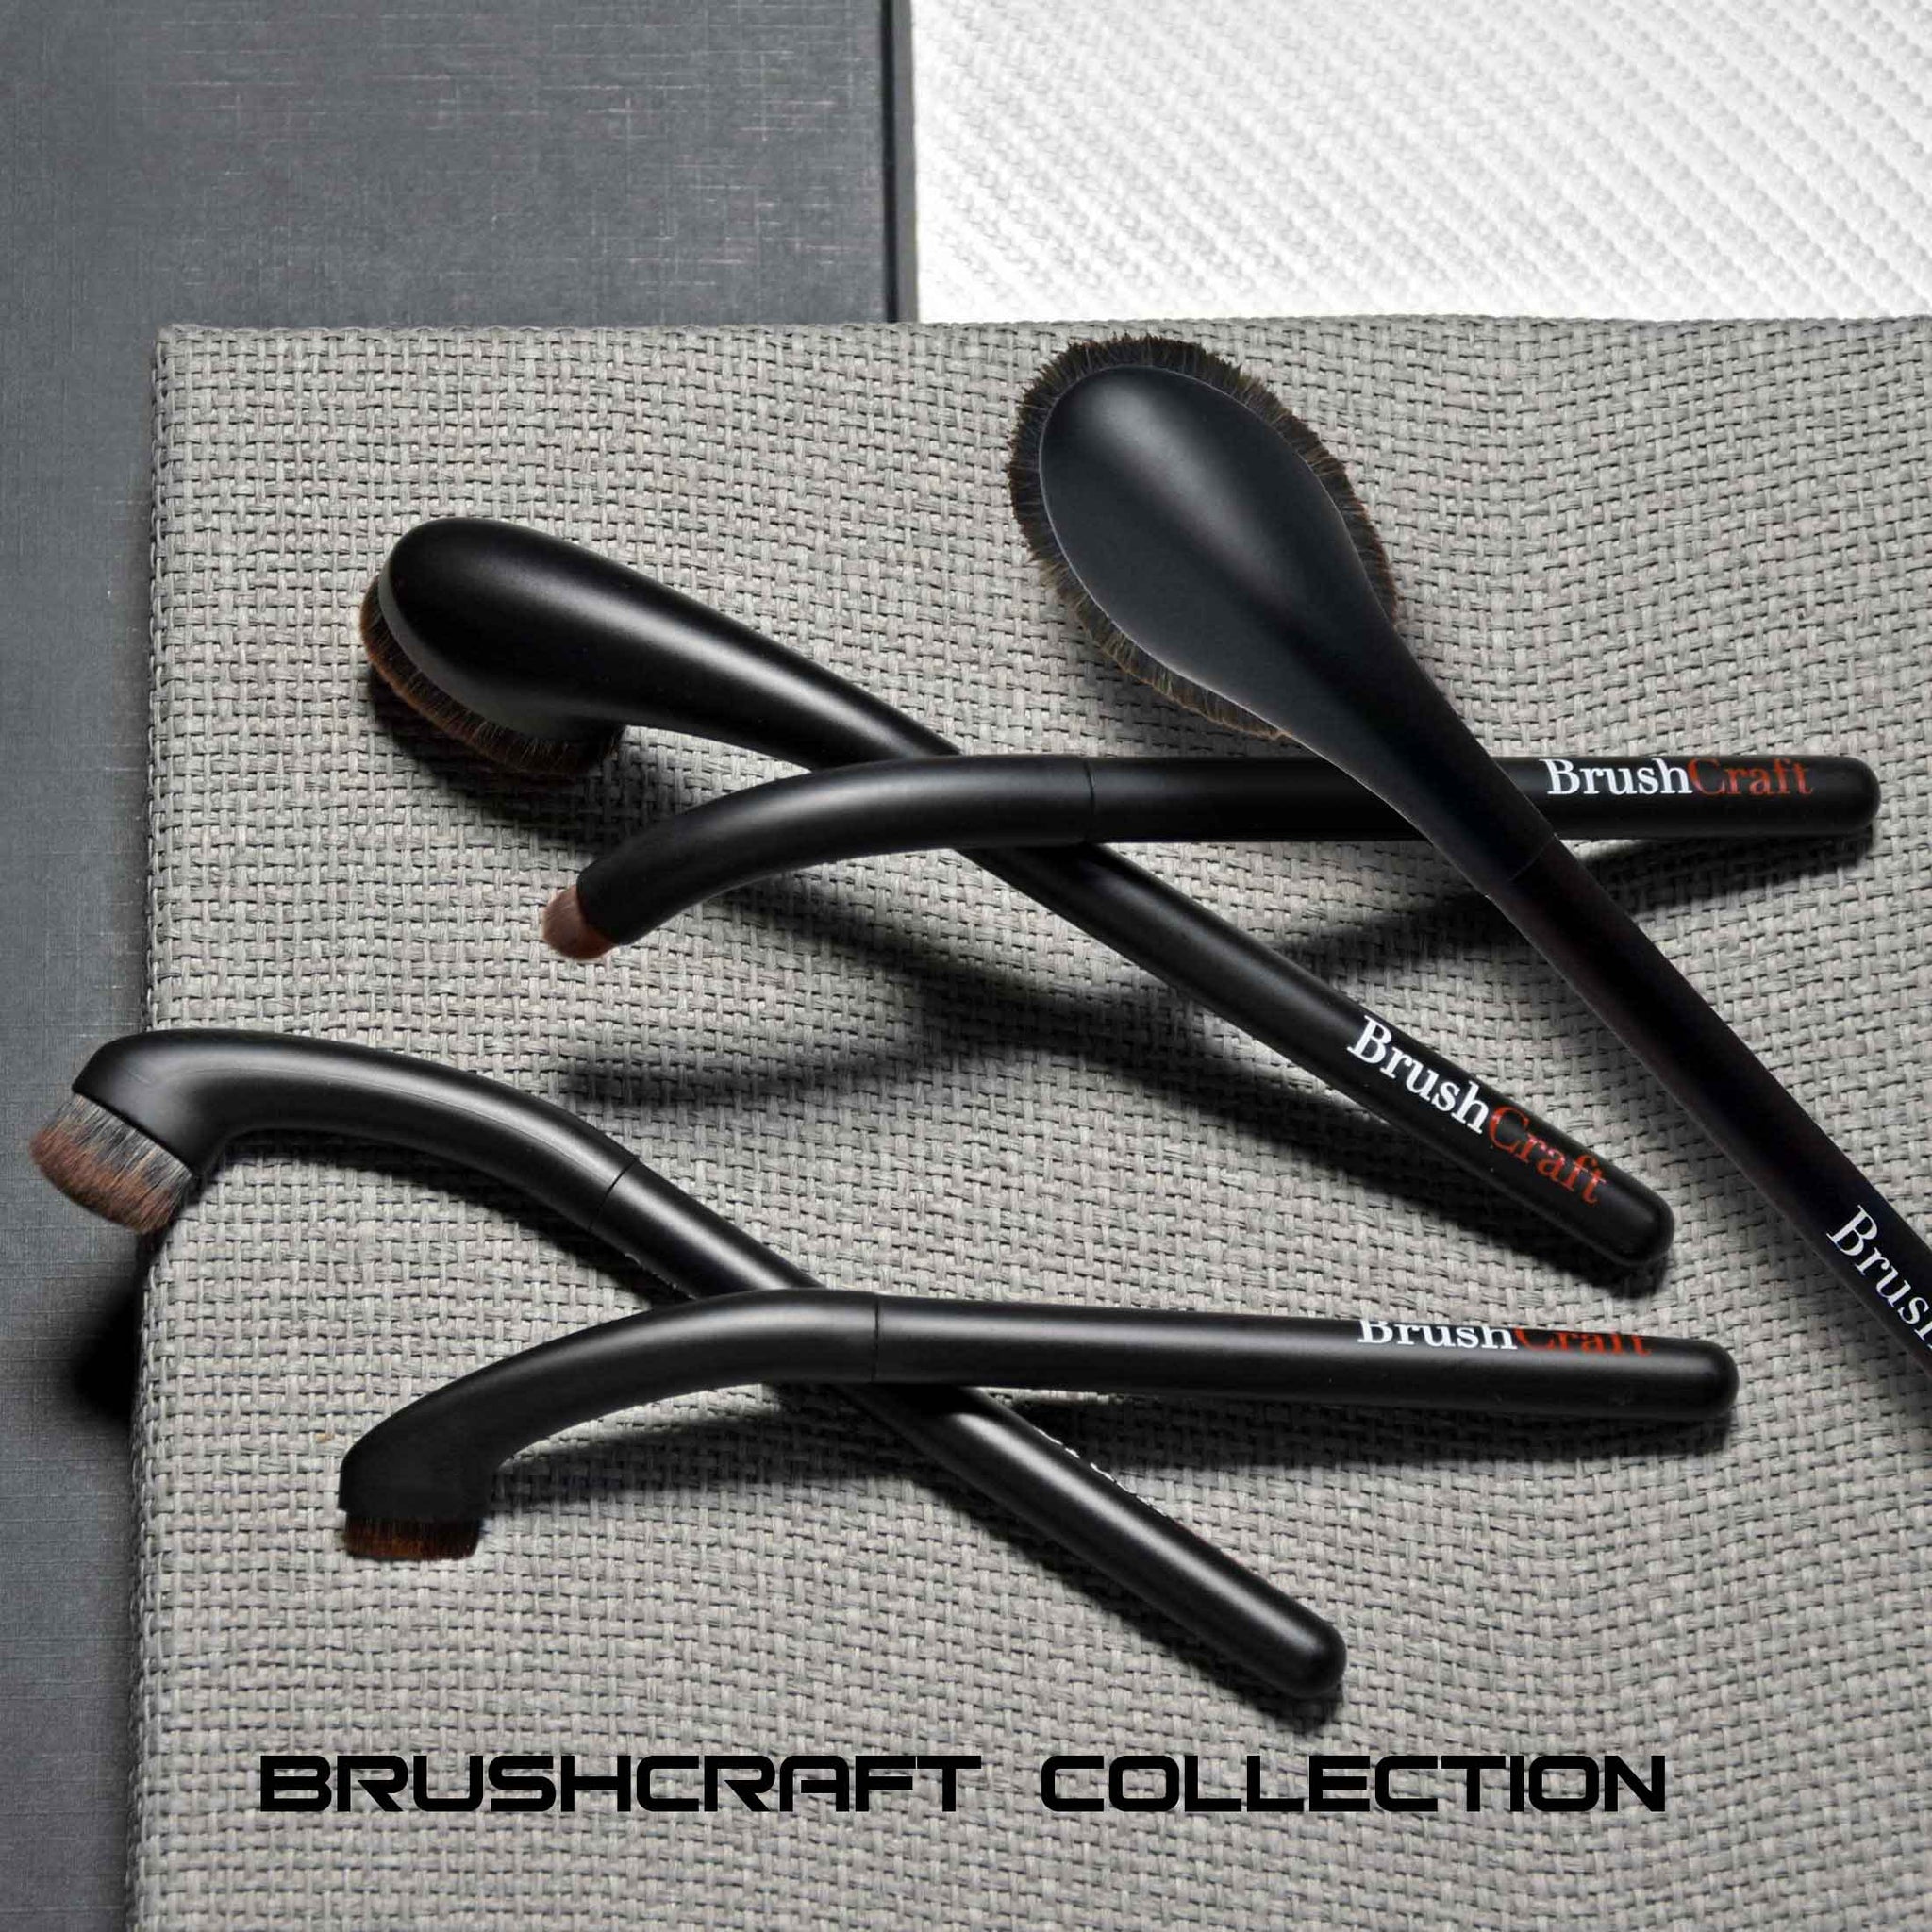 several BrushCraft brushes arranged on a loose woven fabric surface with rectangular layers of materials underneath. clicking on this image will take you to the BrushCraft Collection products listing